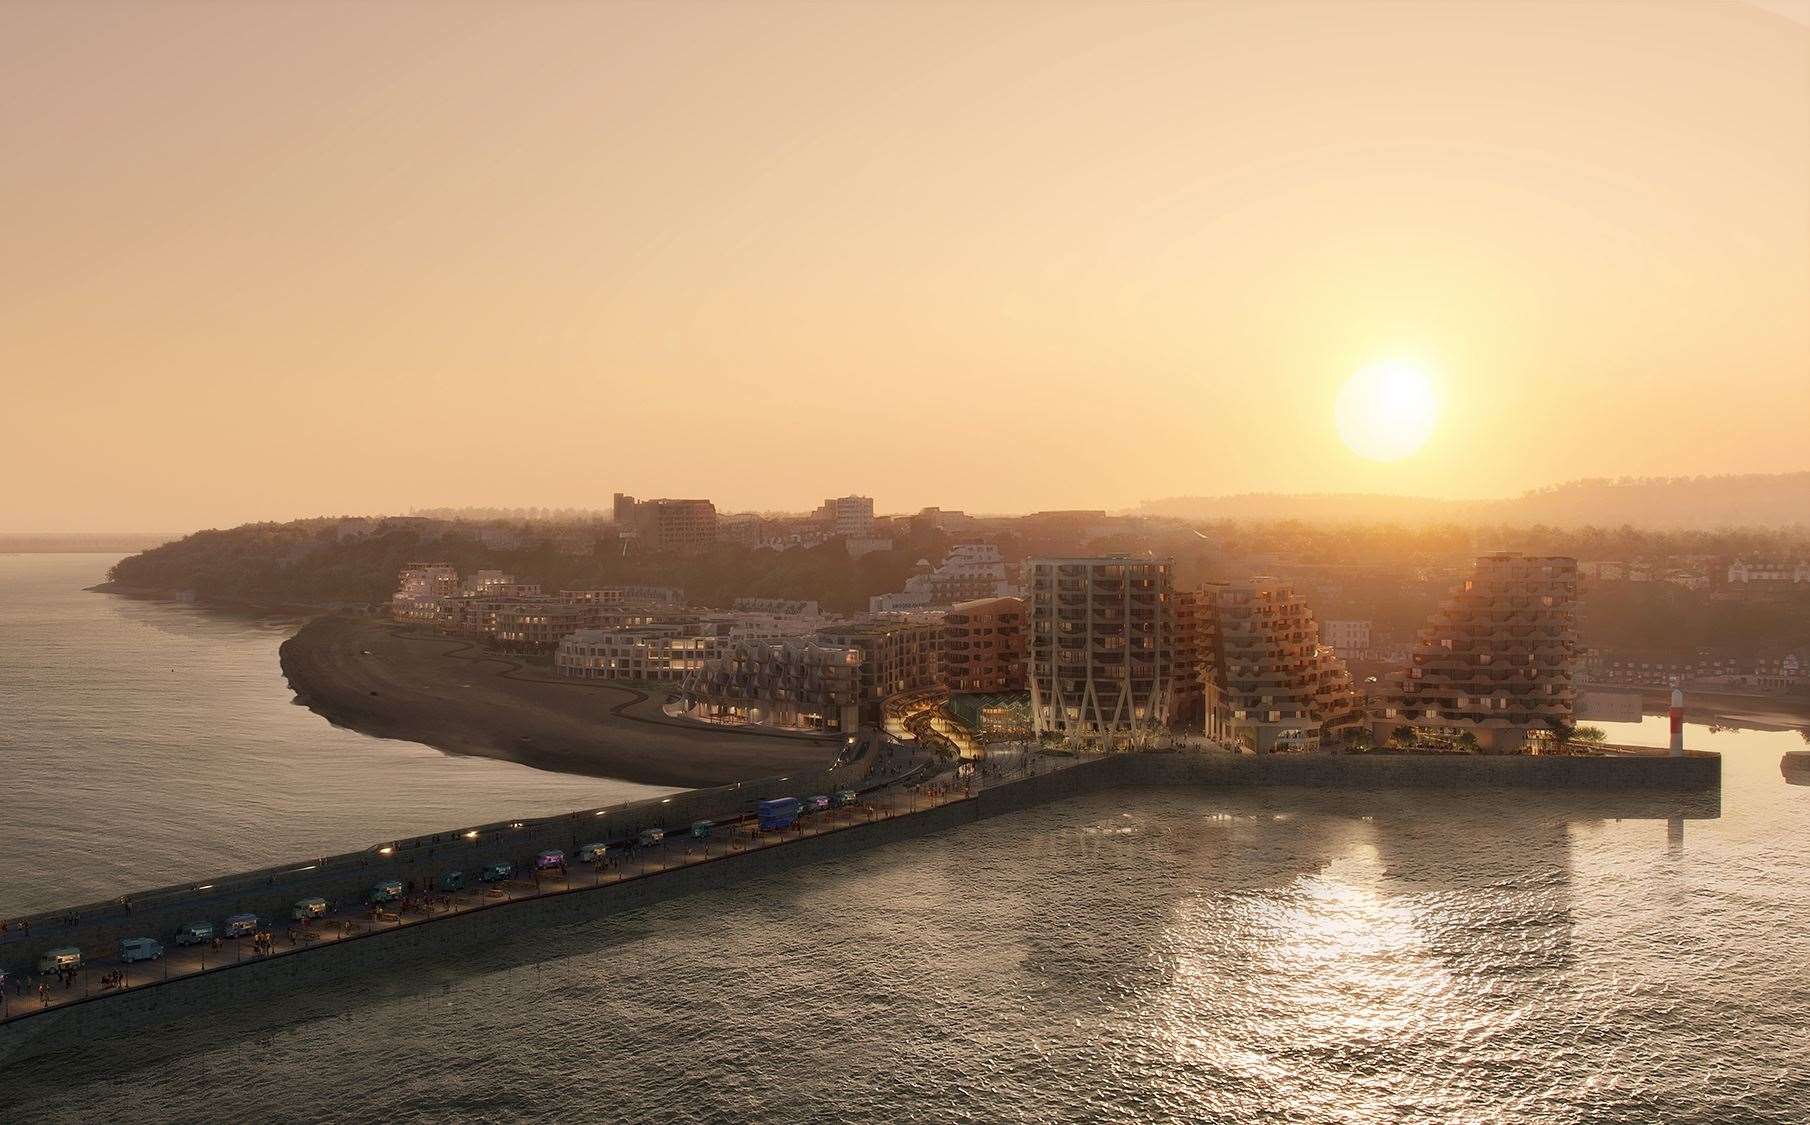 Image showing the proposed Folkestone seafront development – stretching from the already-built Shoreline Crescent flats on the left, to the tower blocks on the harbour arm car park on the right